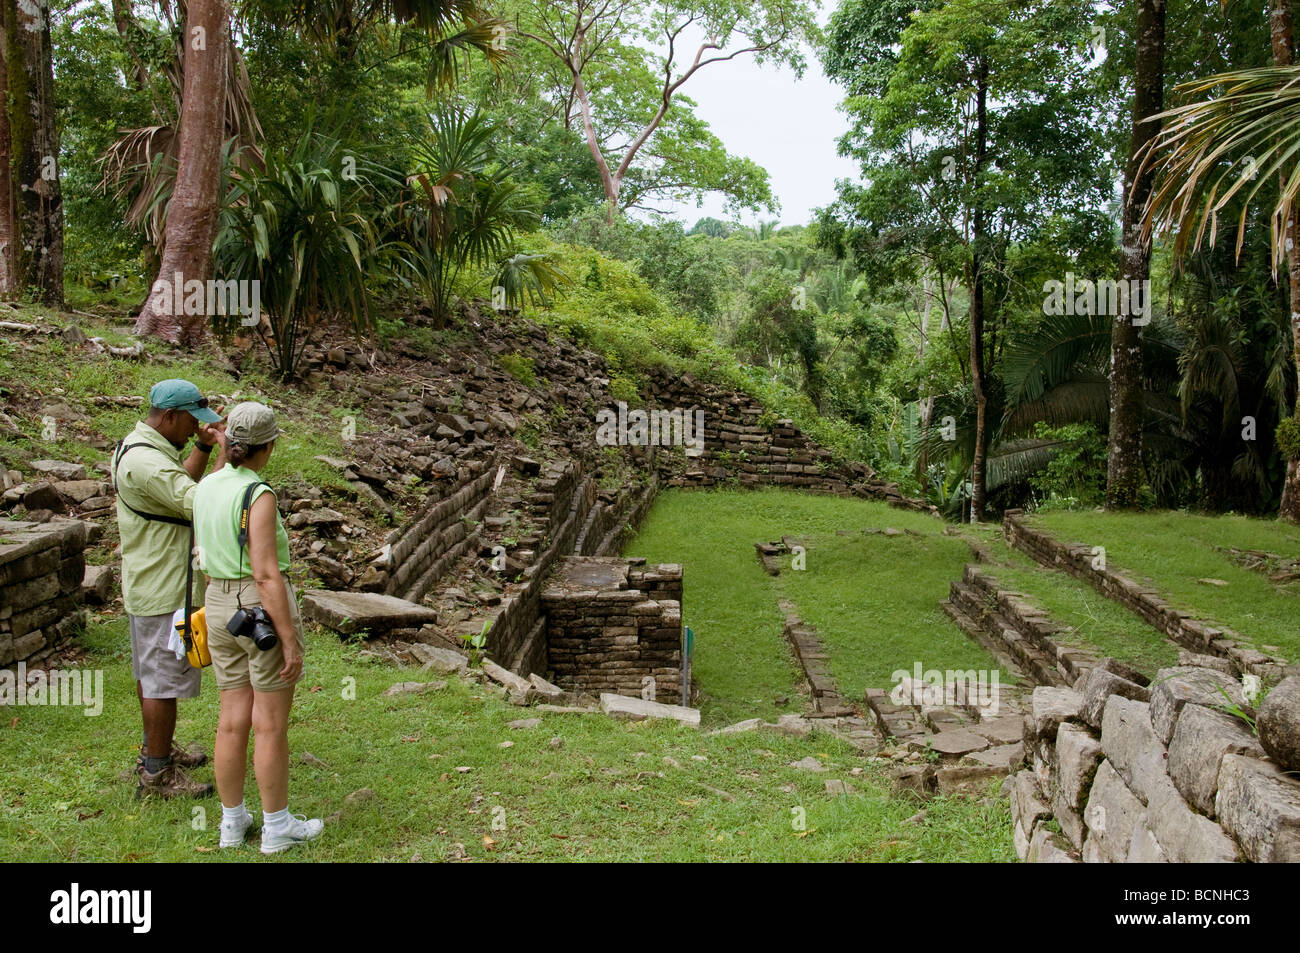 The archaeological features of the Mayan ruins Lubaantun near the southern Belize town of Punta Gorda are interesting. Stock Photo